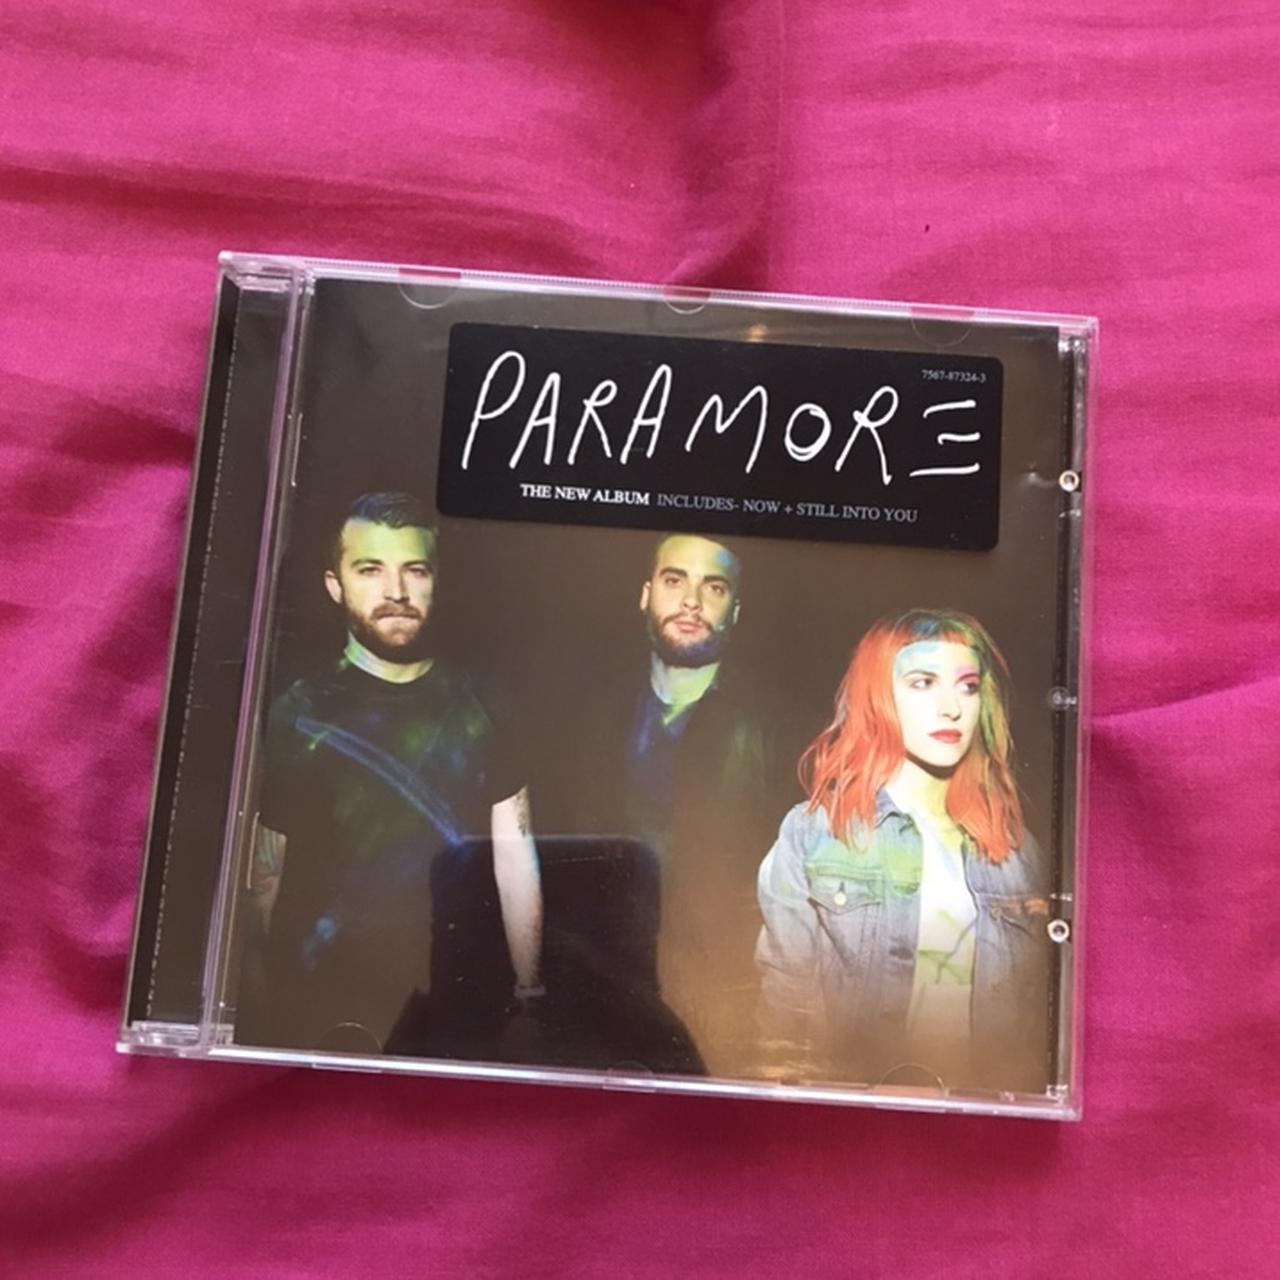 Paramore CD 💞P&P included in the price💞 - BUY 2 - Depop